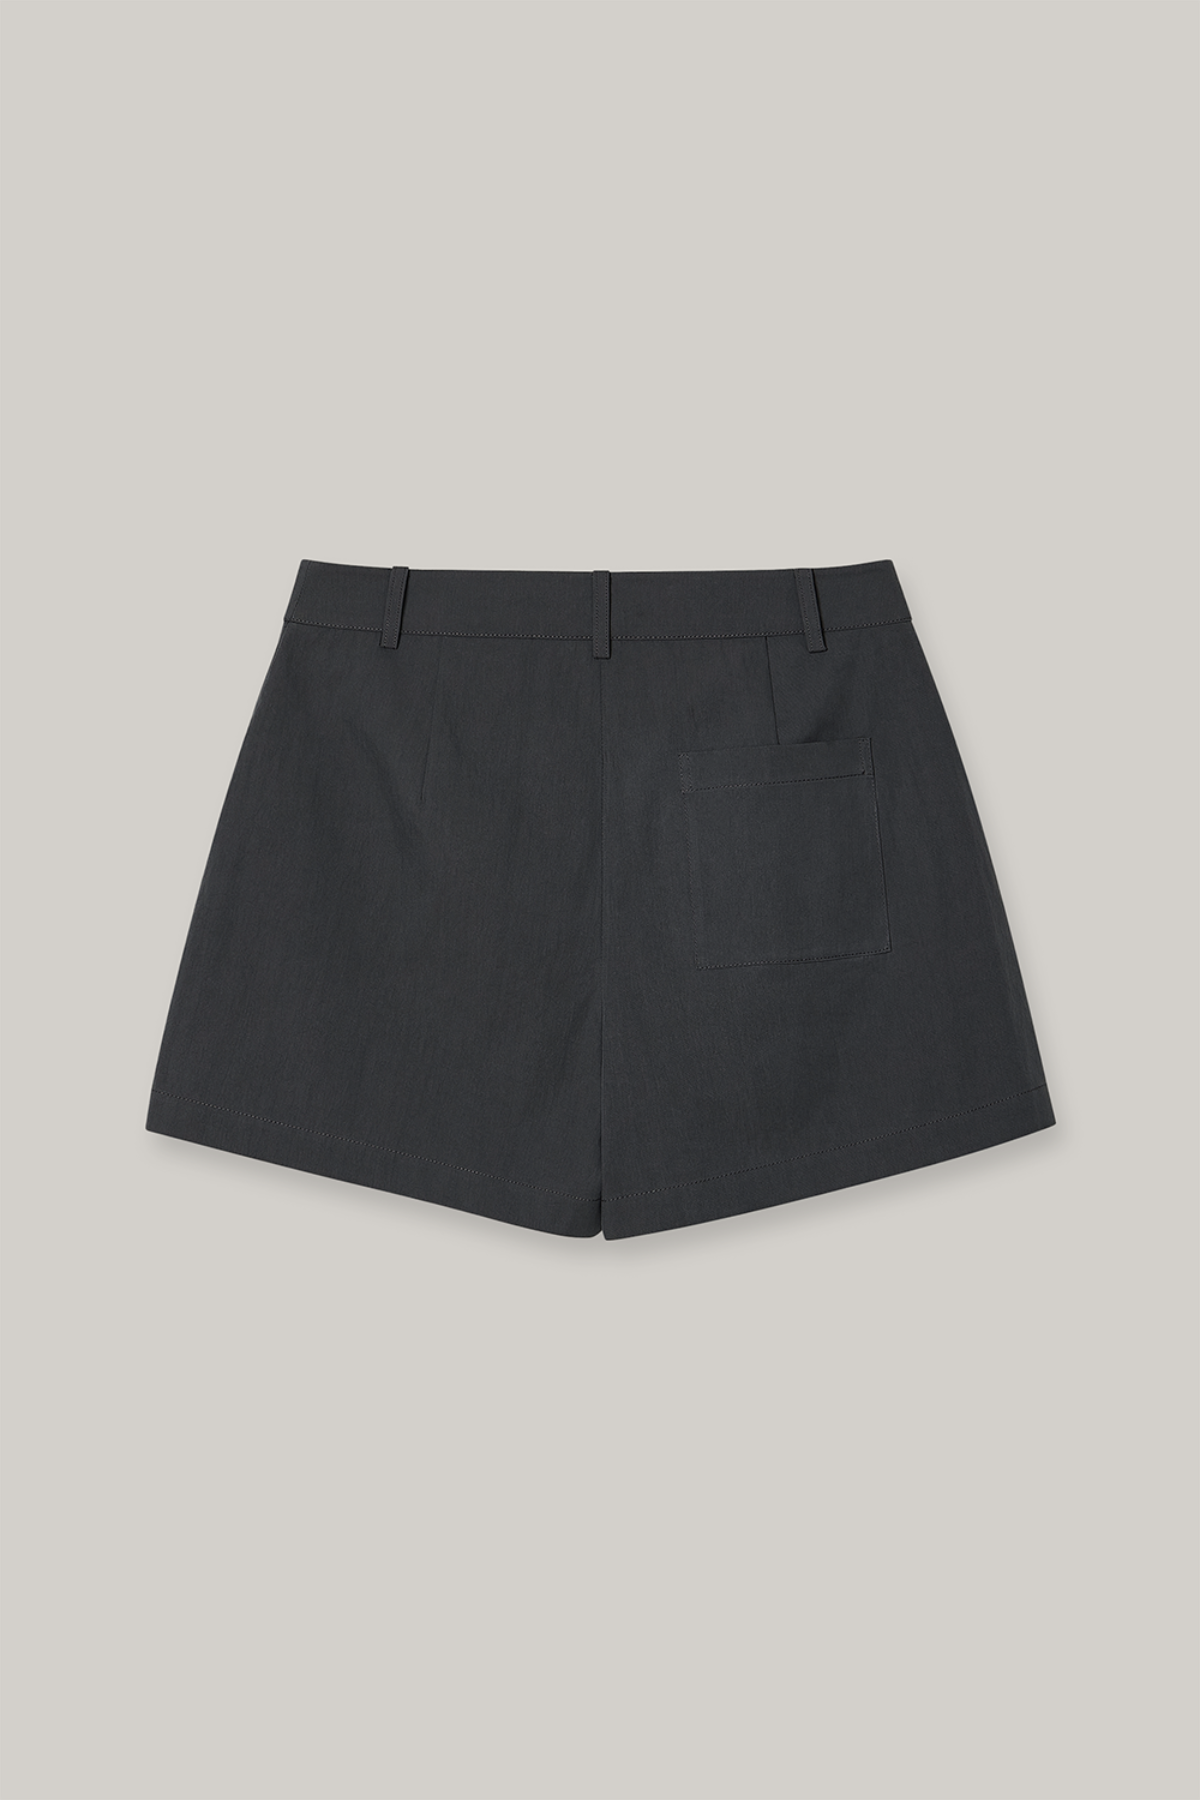 Tuck Pocket Shorts In Charcoal